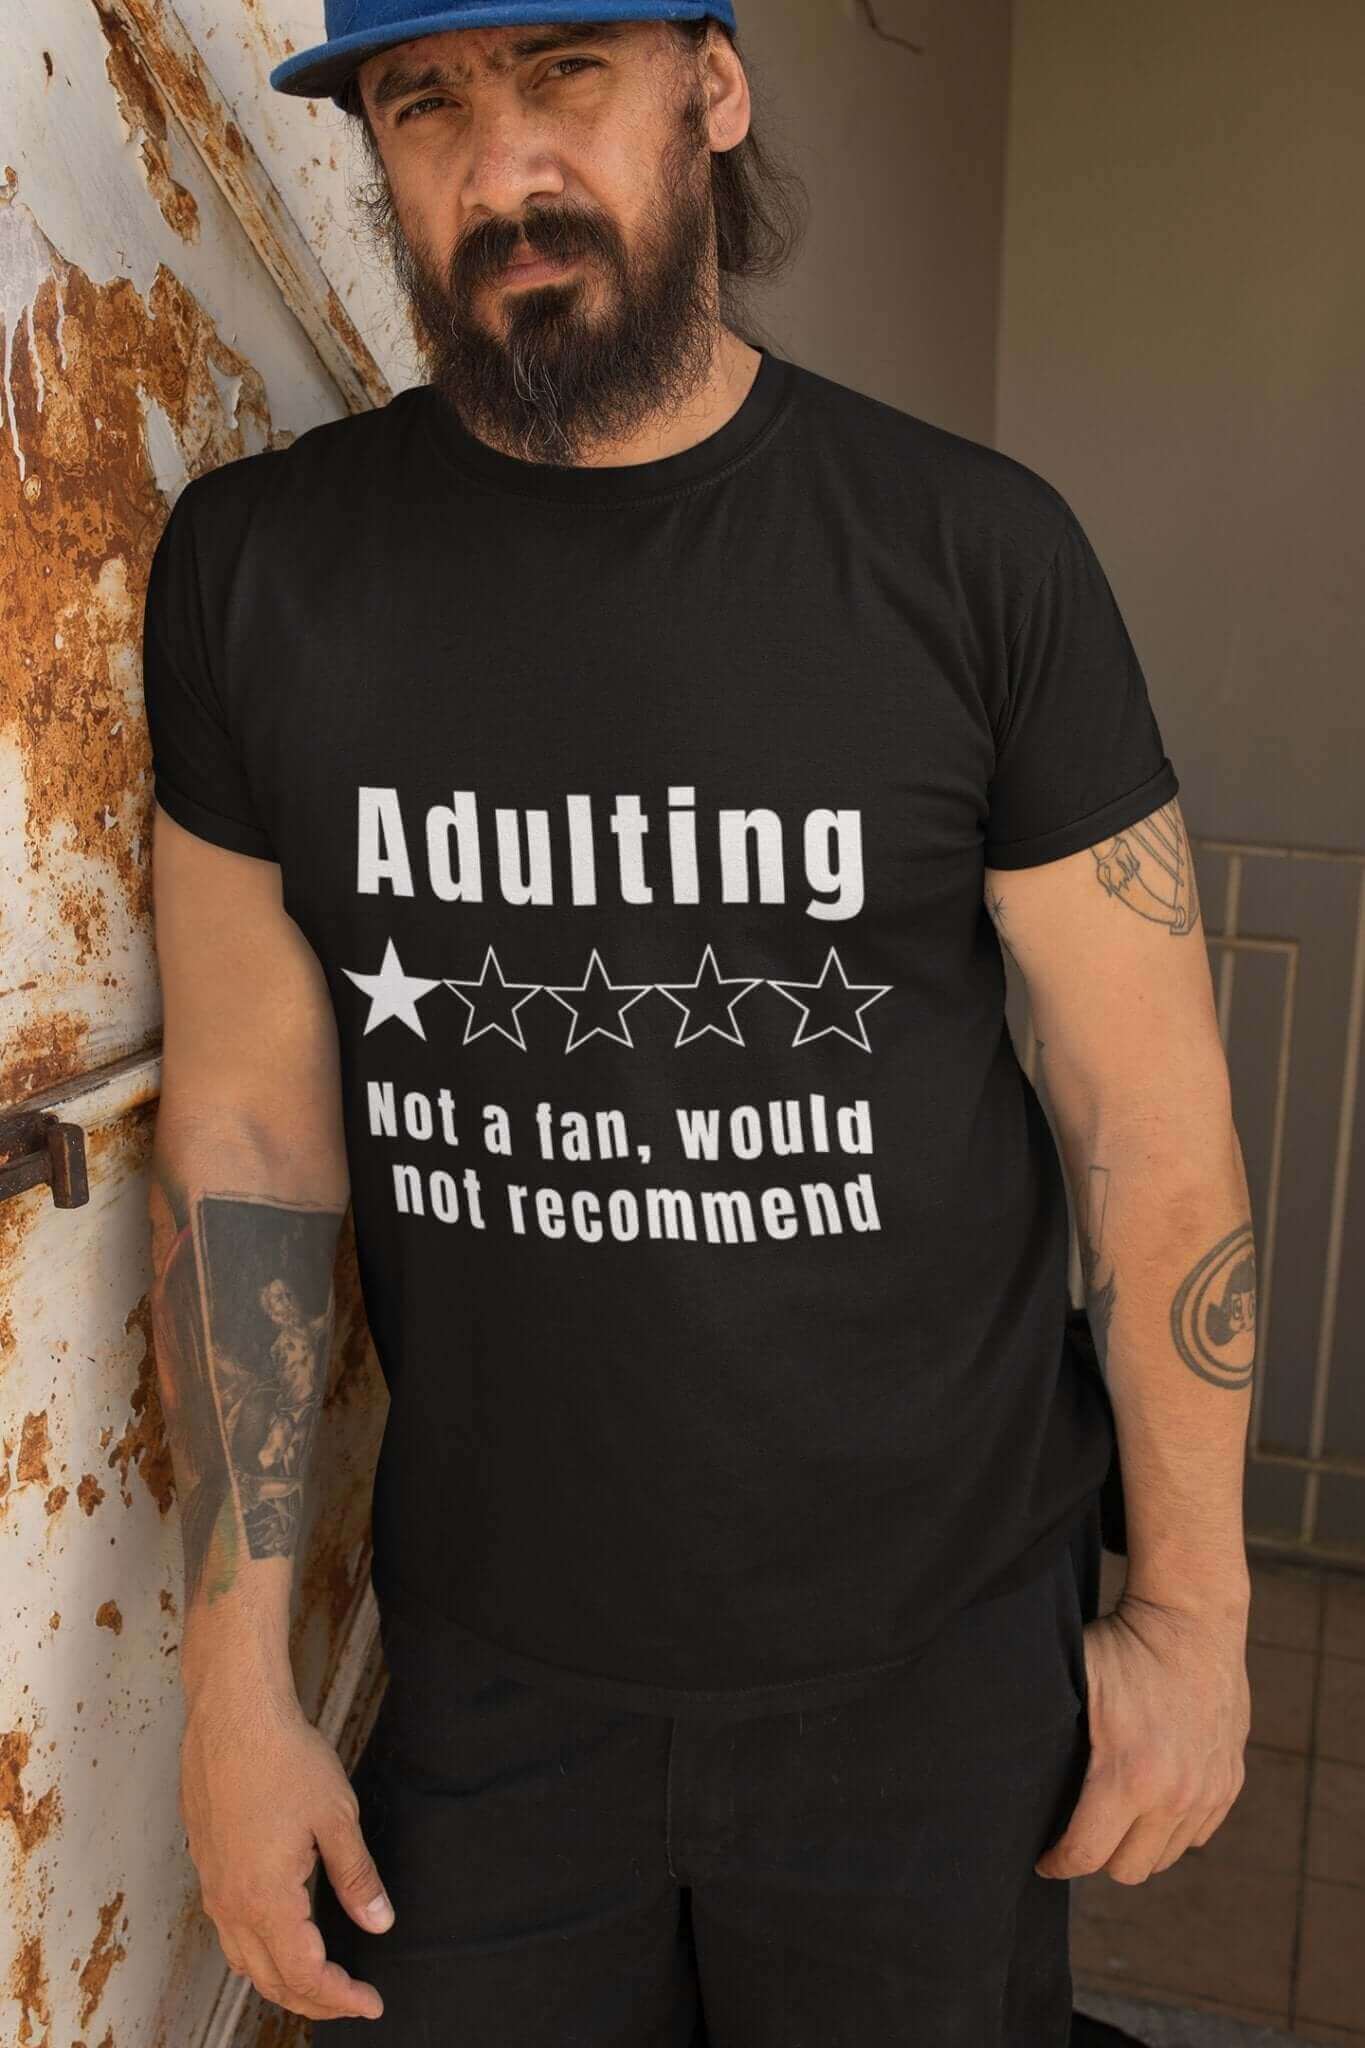 Adulting, not a fan would not recommend - Unisex Short-Sleeve T-Shirt - Horrible Designs